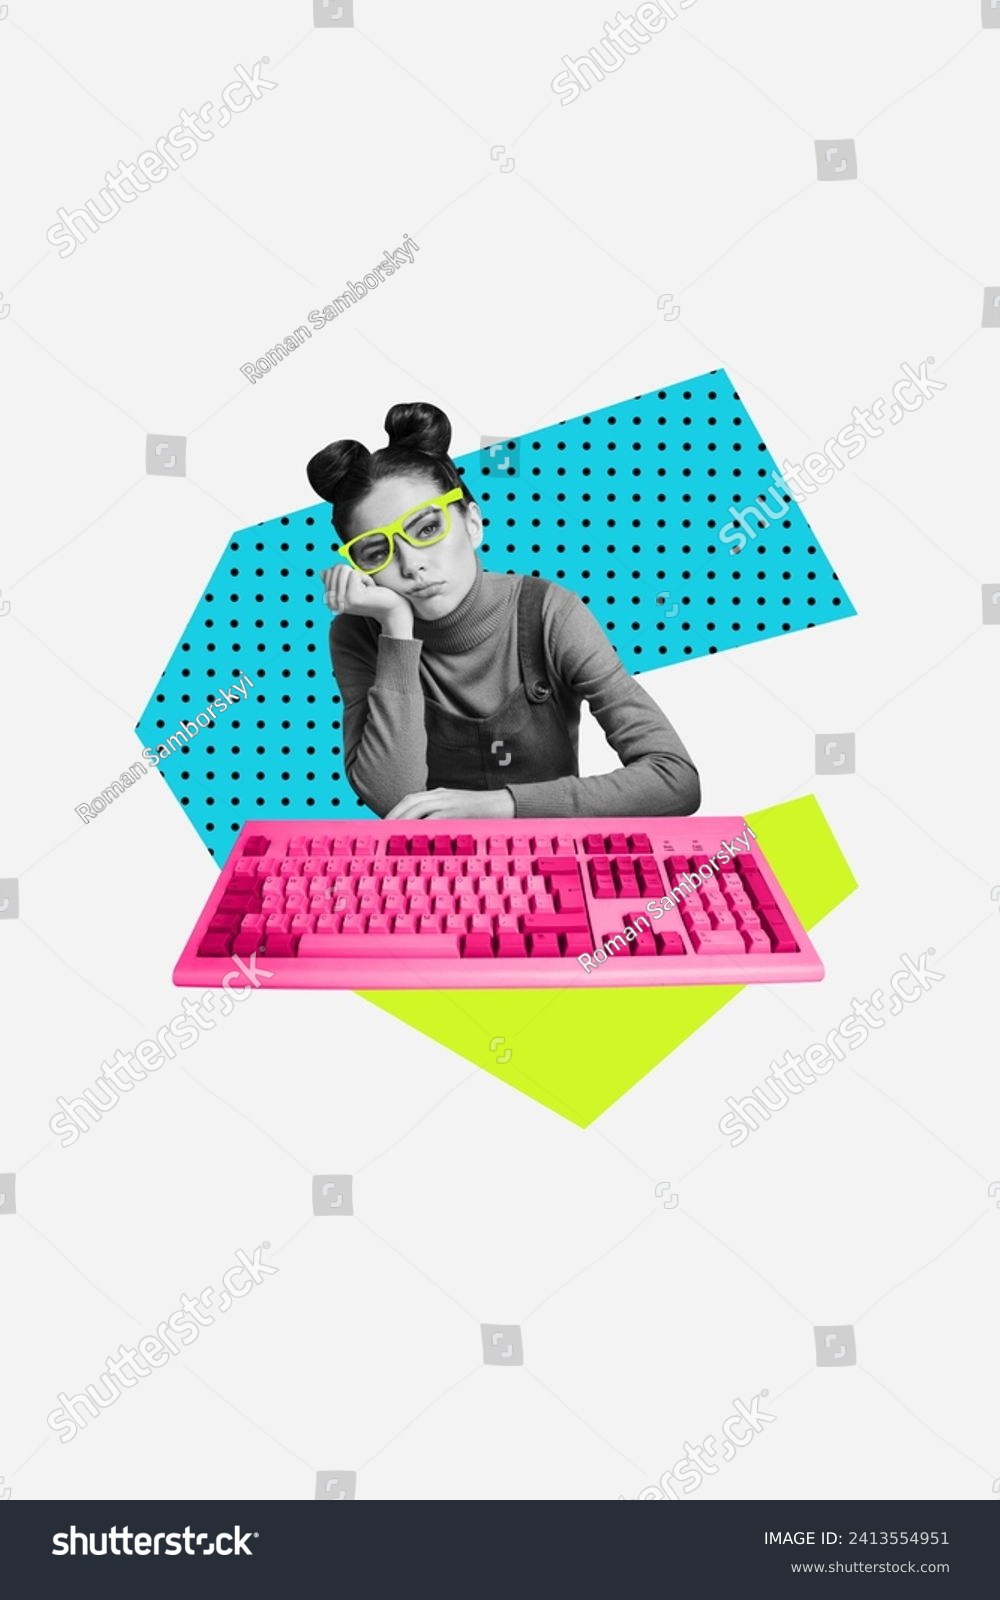 Vertical collage image of unsatisfied bored black white effect girl computer keyboard isolated on drawing background #2413554951